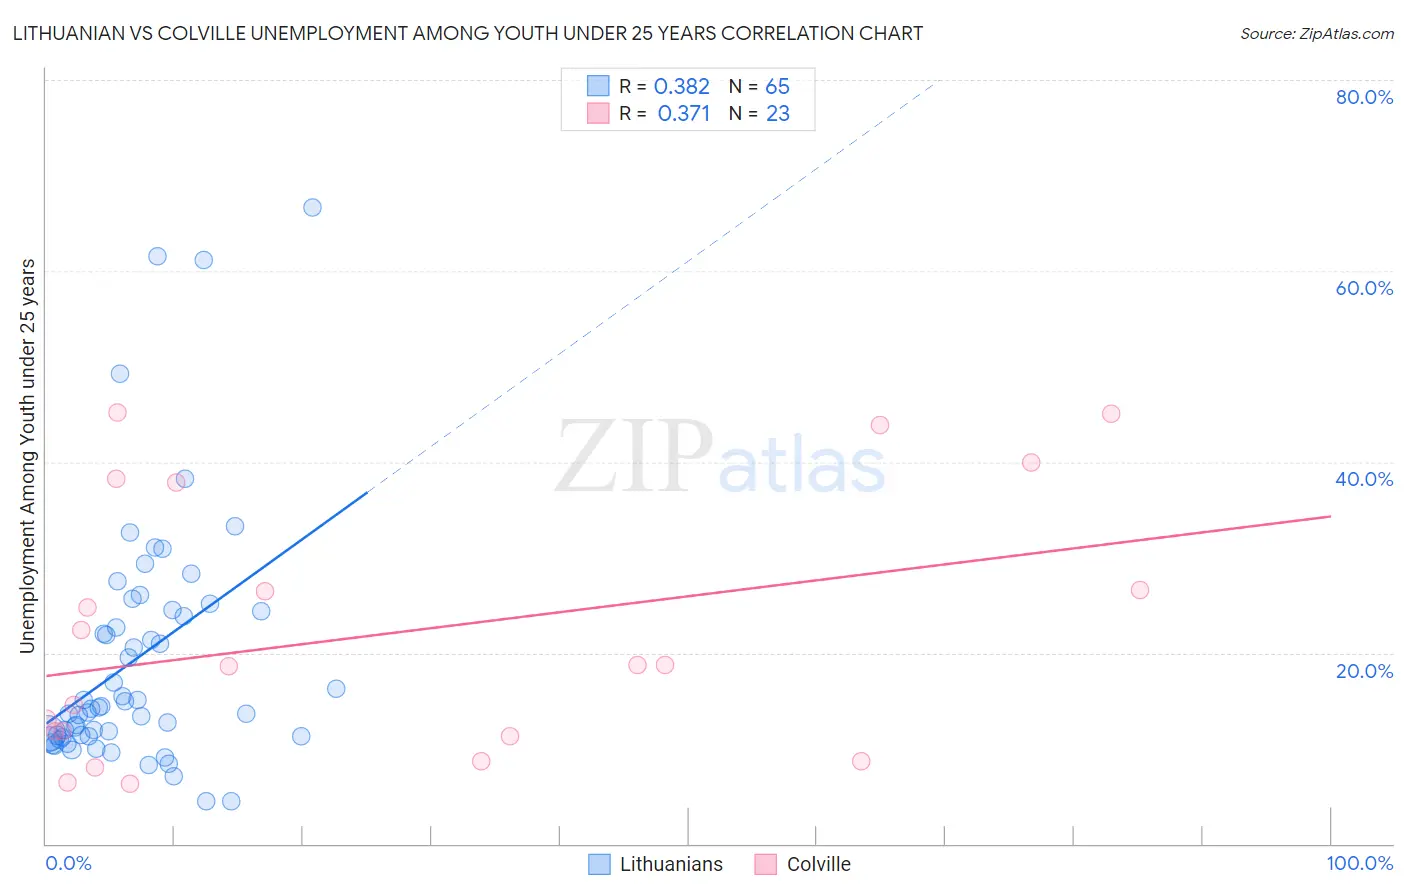 Lithuanian vs Colville Unemployment Among Youth under 25 years